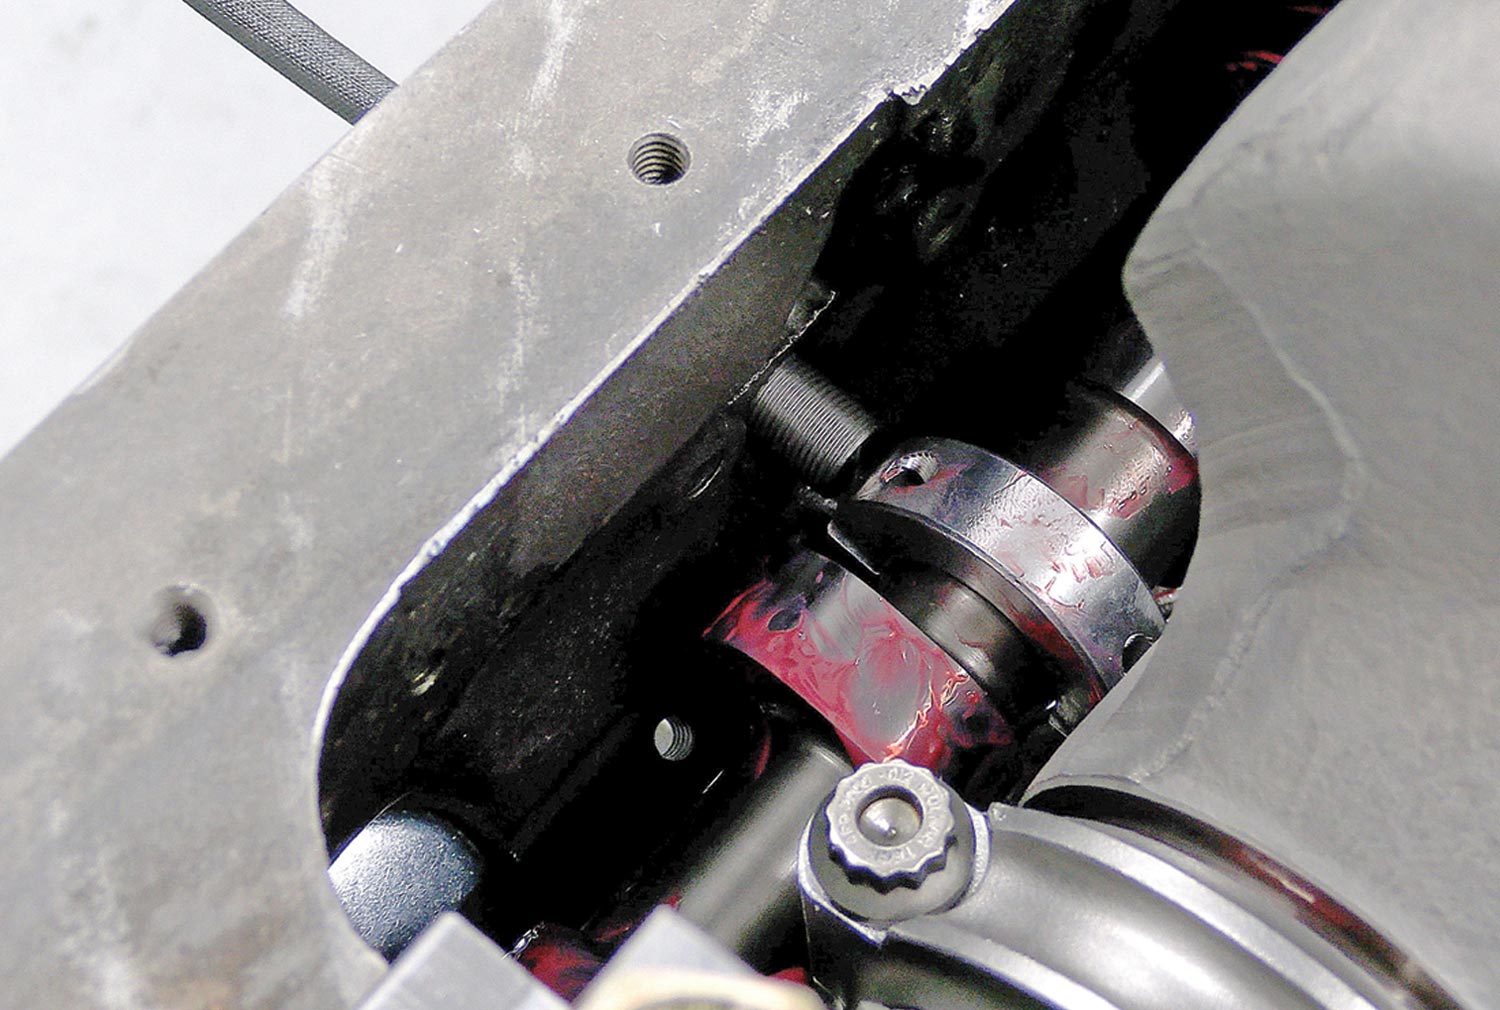 a look at the camshaft in the engine block